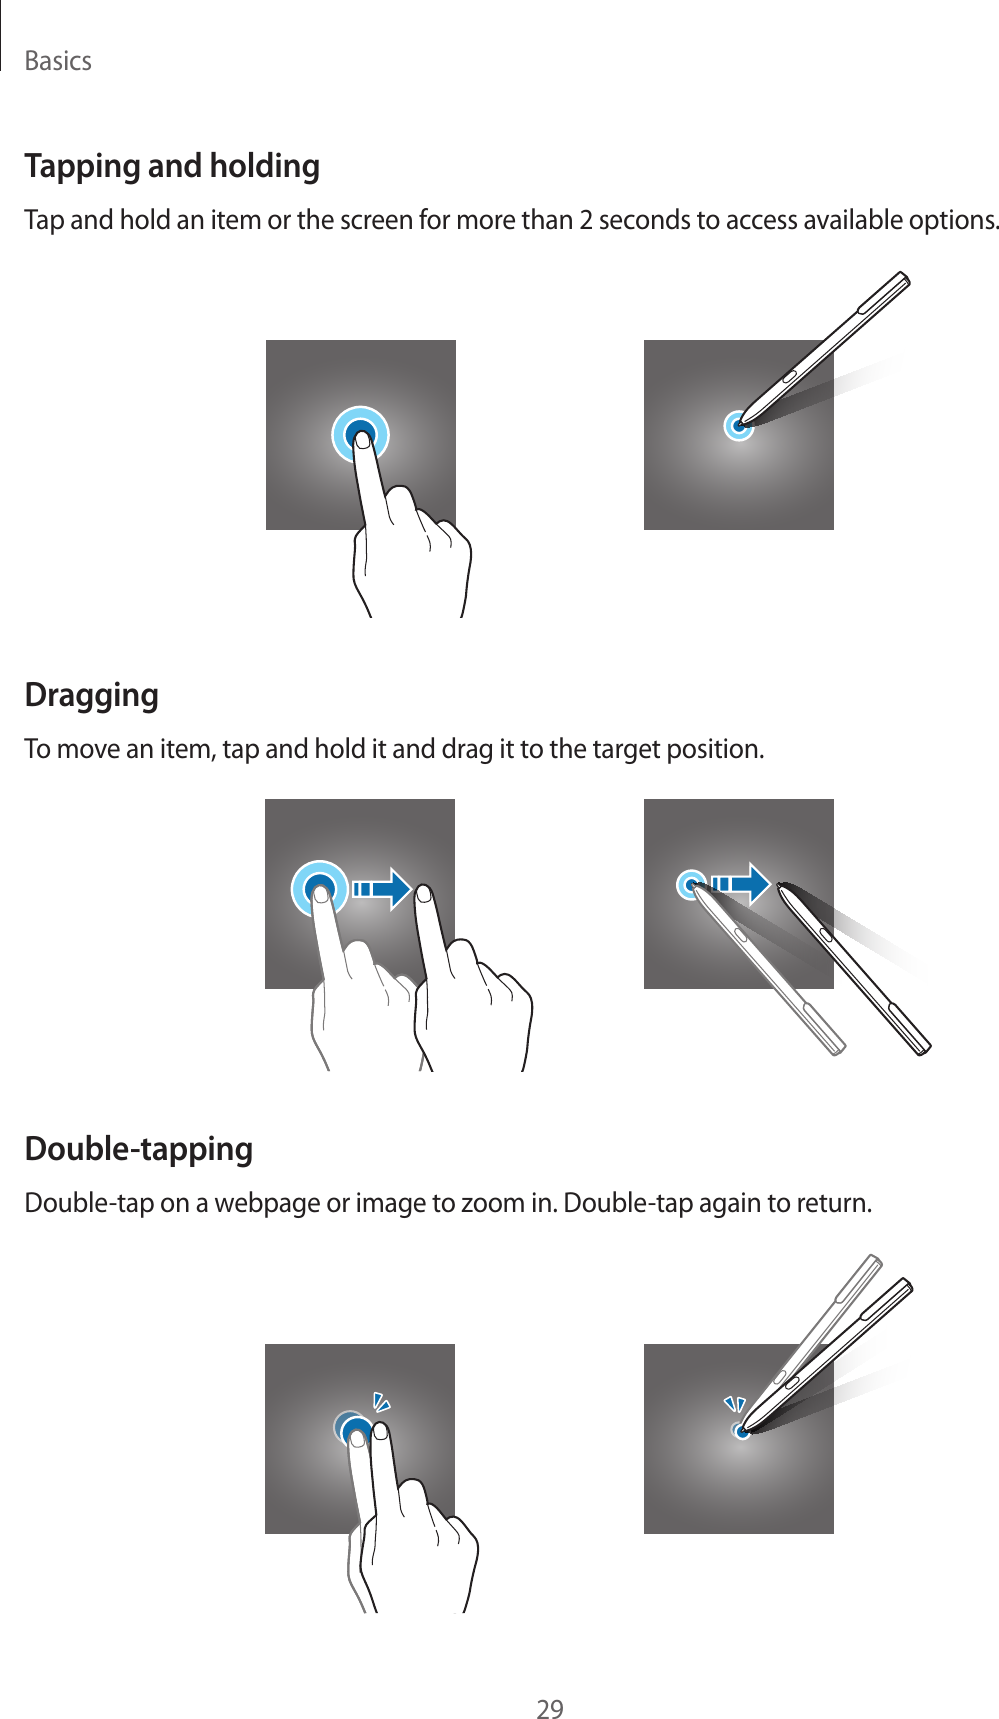 Basics29Tapping and holdingTap and hold an item or the screen for more than 2 seconds to access available options.DraggingTo move an item, tap and hold it and drag it to the target position.Double-tappingDouble-tap on a webpage or image to zoom in. Double-tap again to return.